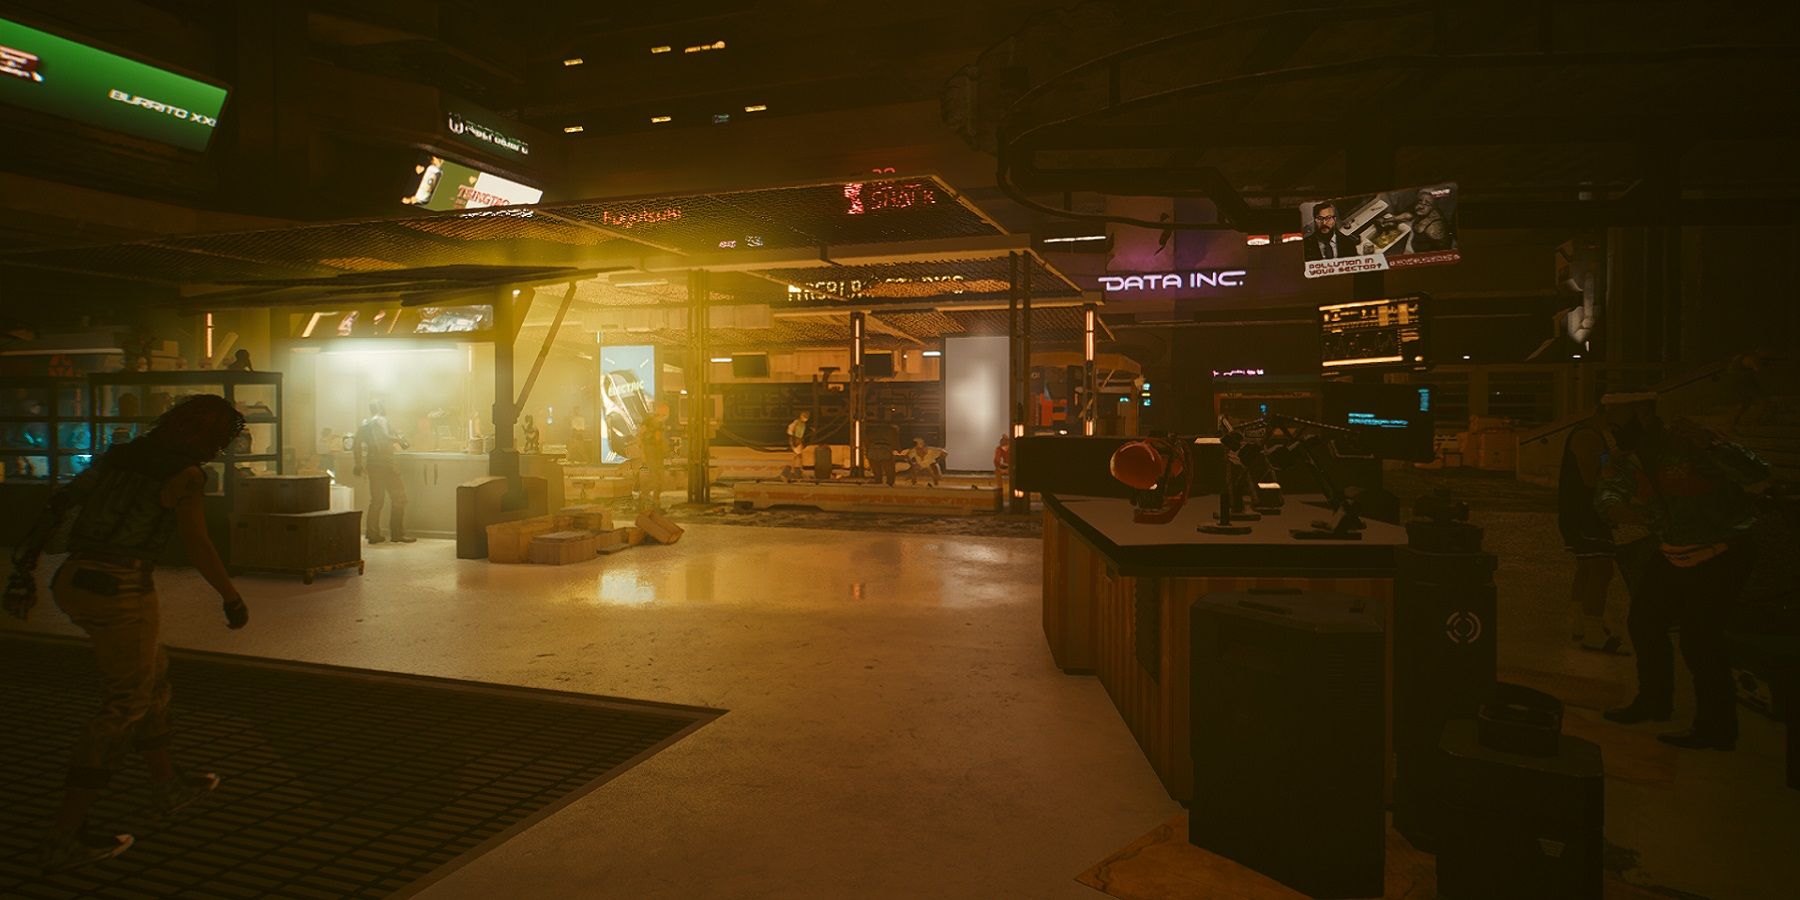 Image from Cyberpunk 2077 showing one of the markets.